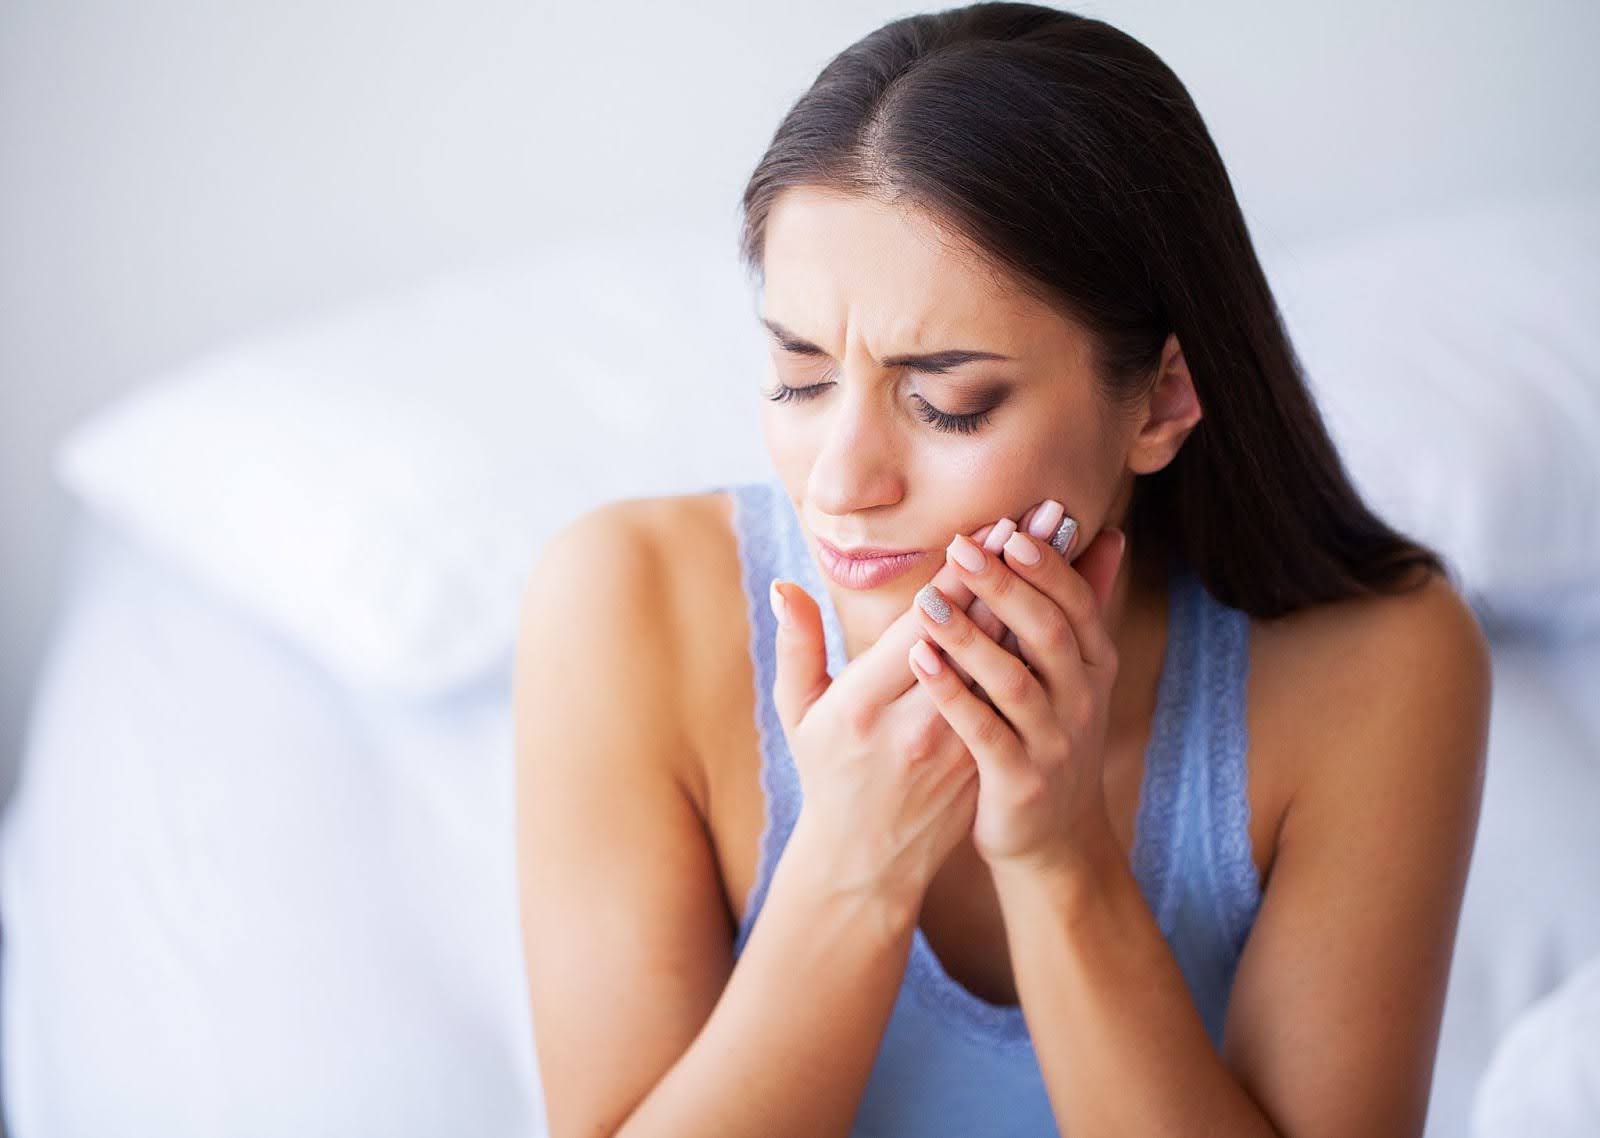 What risks are associated with untreated tooth sensitivity linked to gum disease